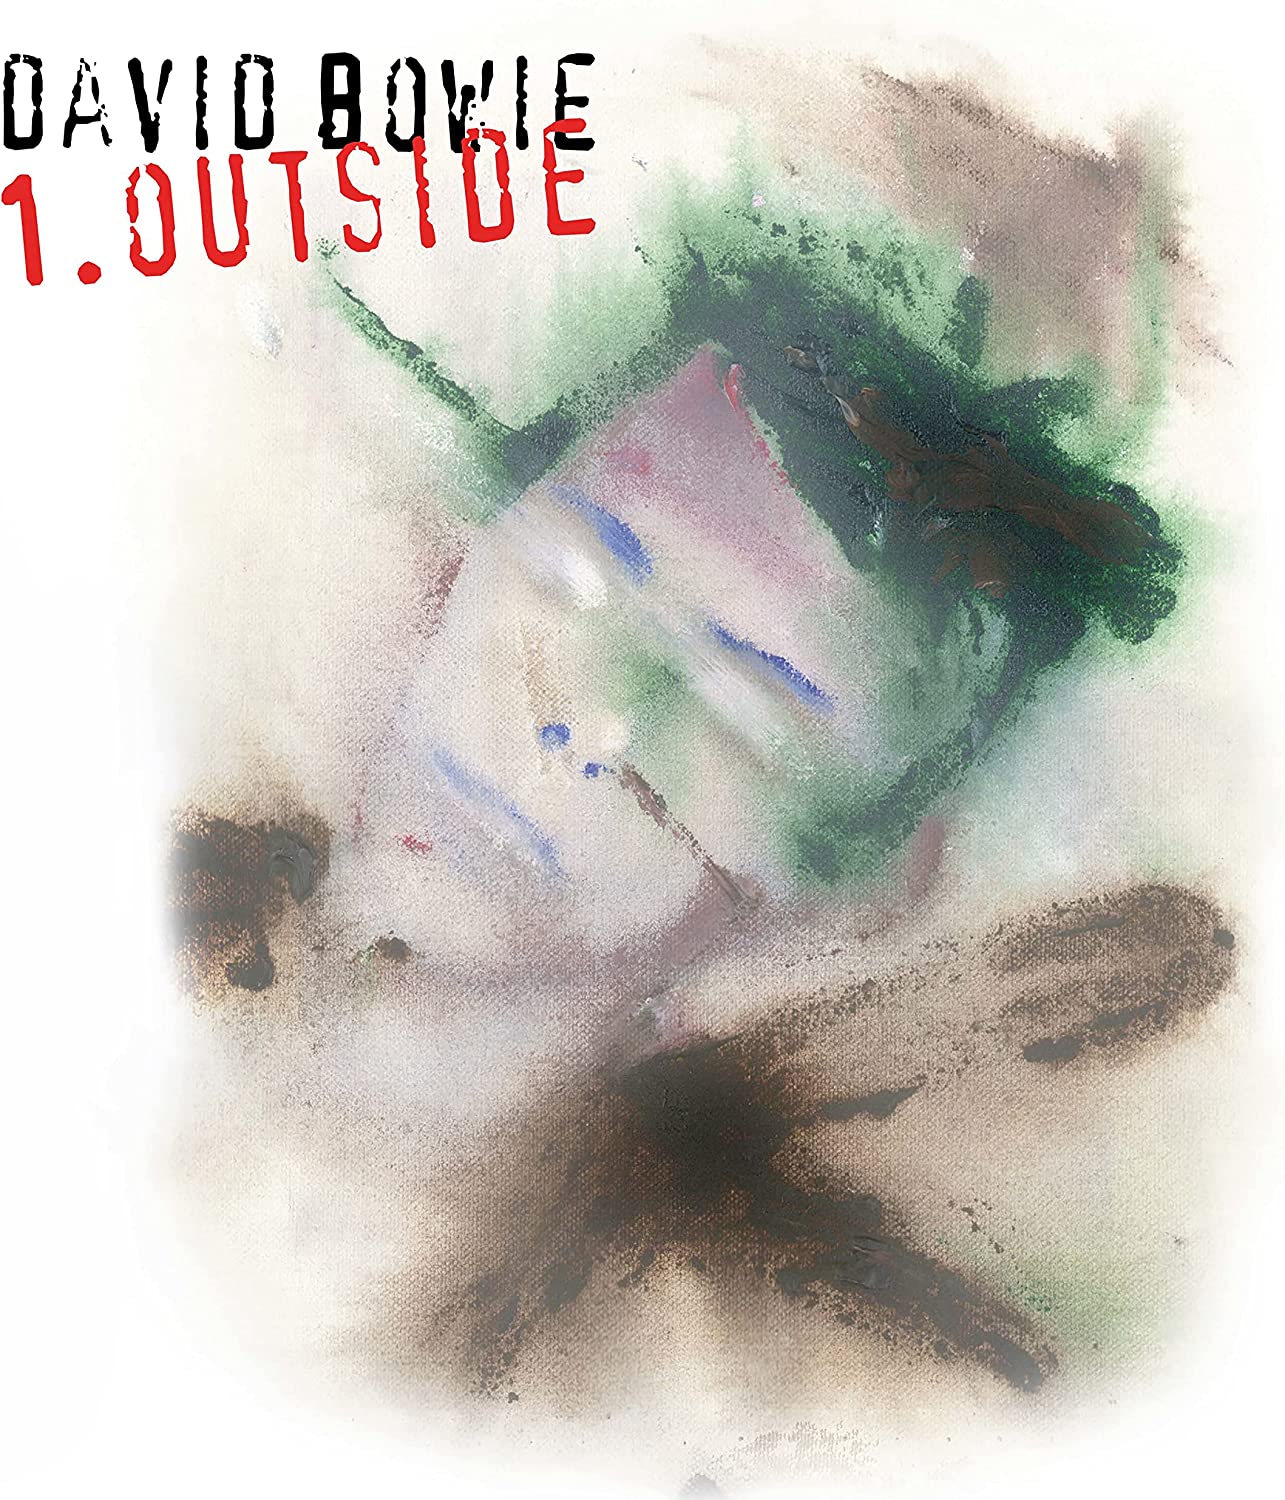 1. Outside (The Nathan Adler Diaries: A Hyper Cycle) - Vinyl | David Bowie image0